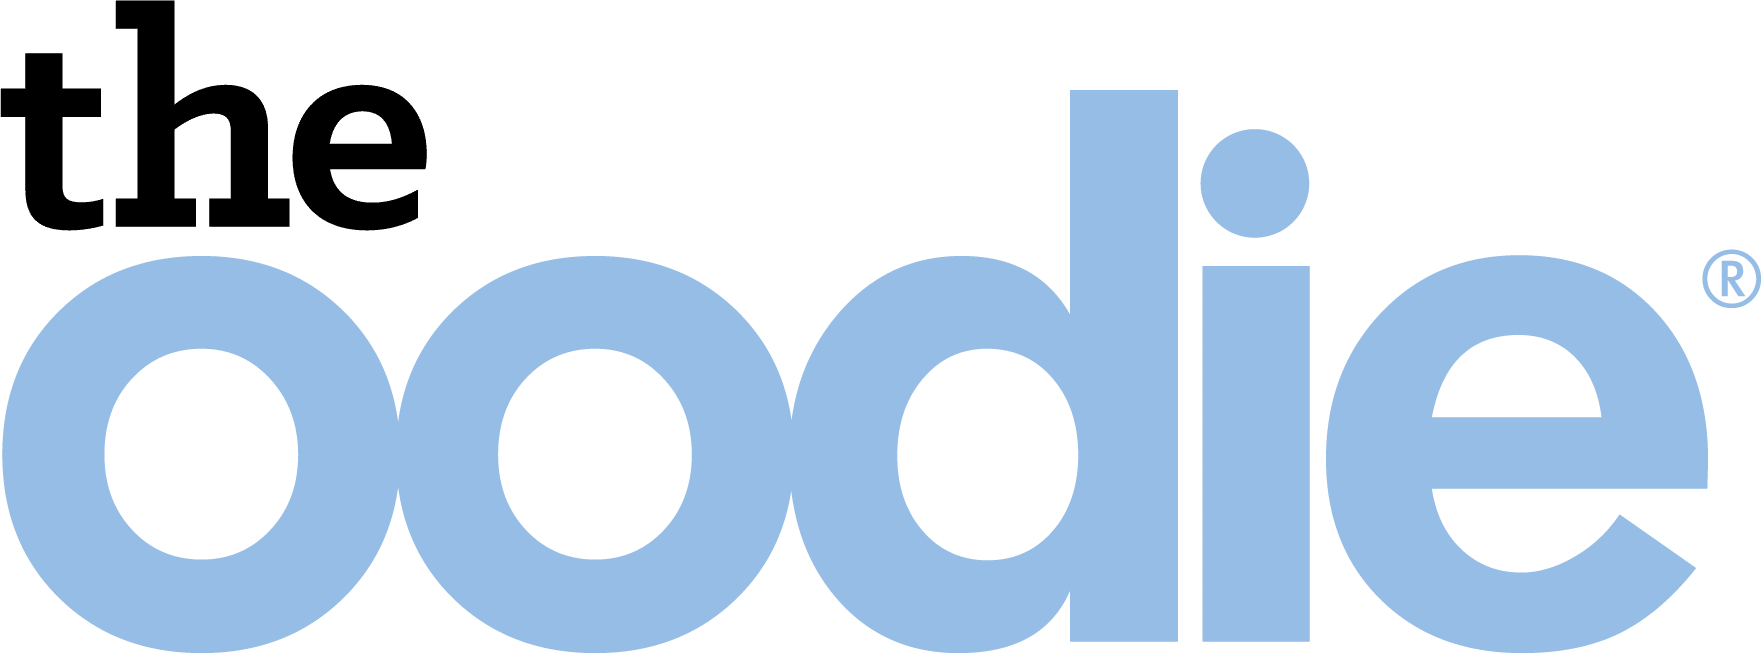 the oodie logo (black and blue)